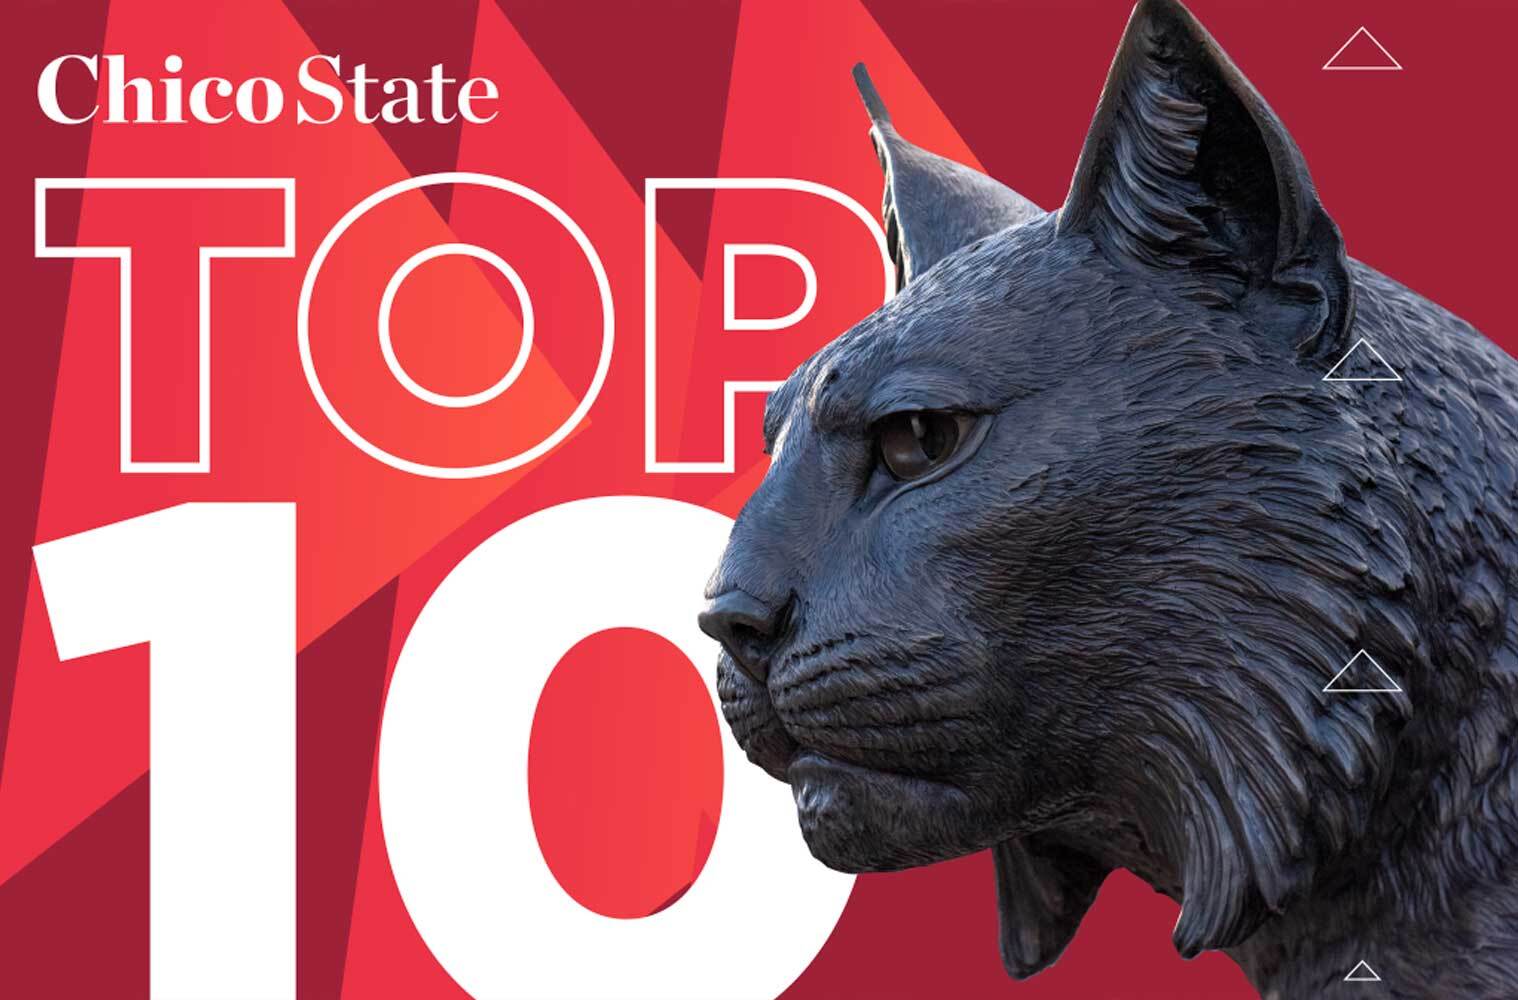 The Chico State wildcat logo is in the foreground of an image with a red background